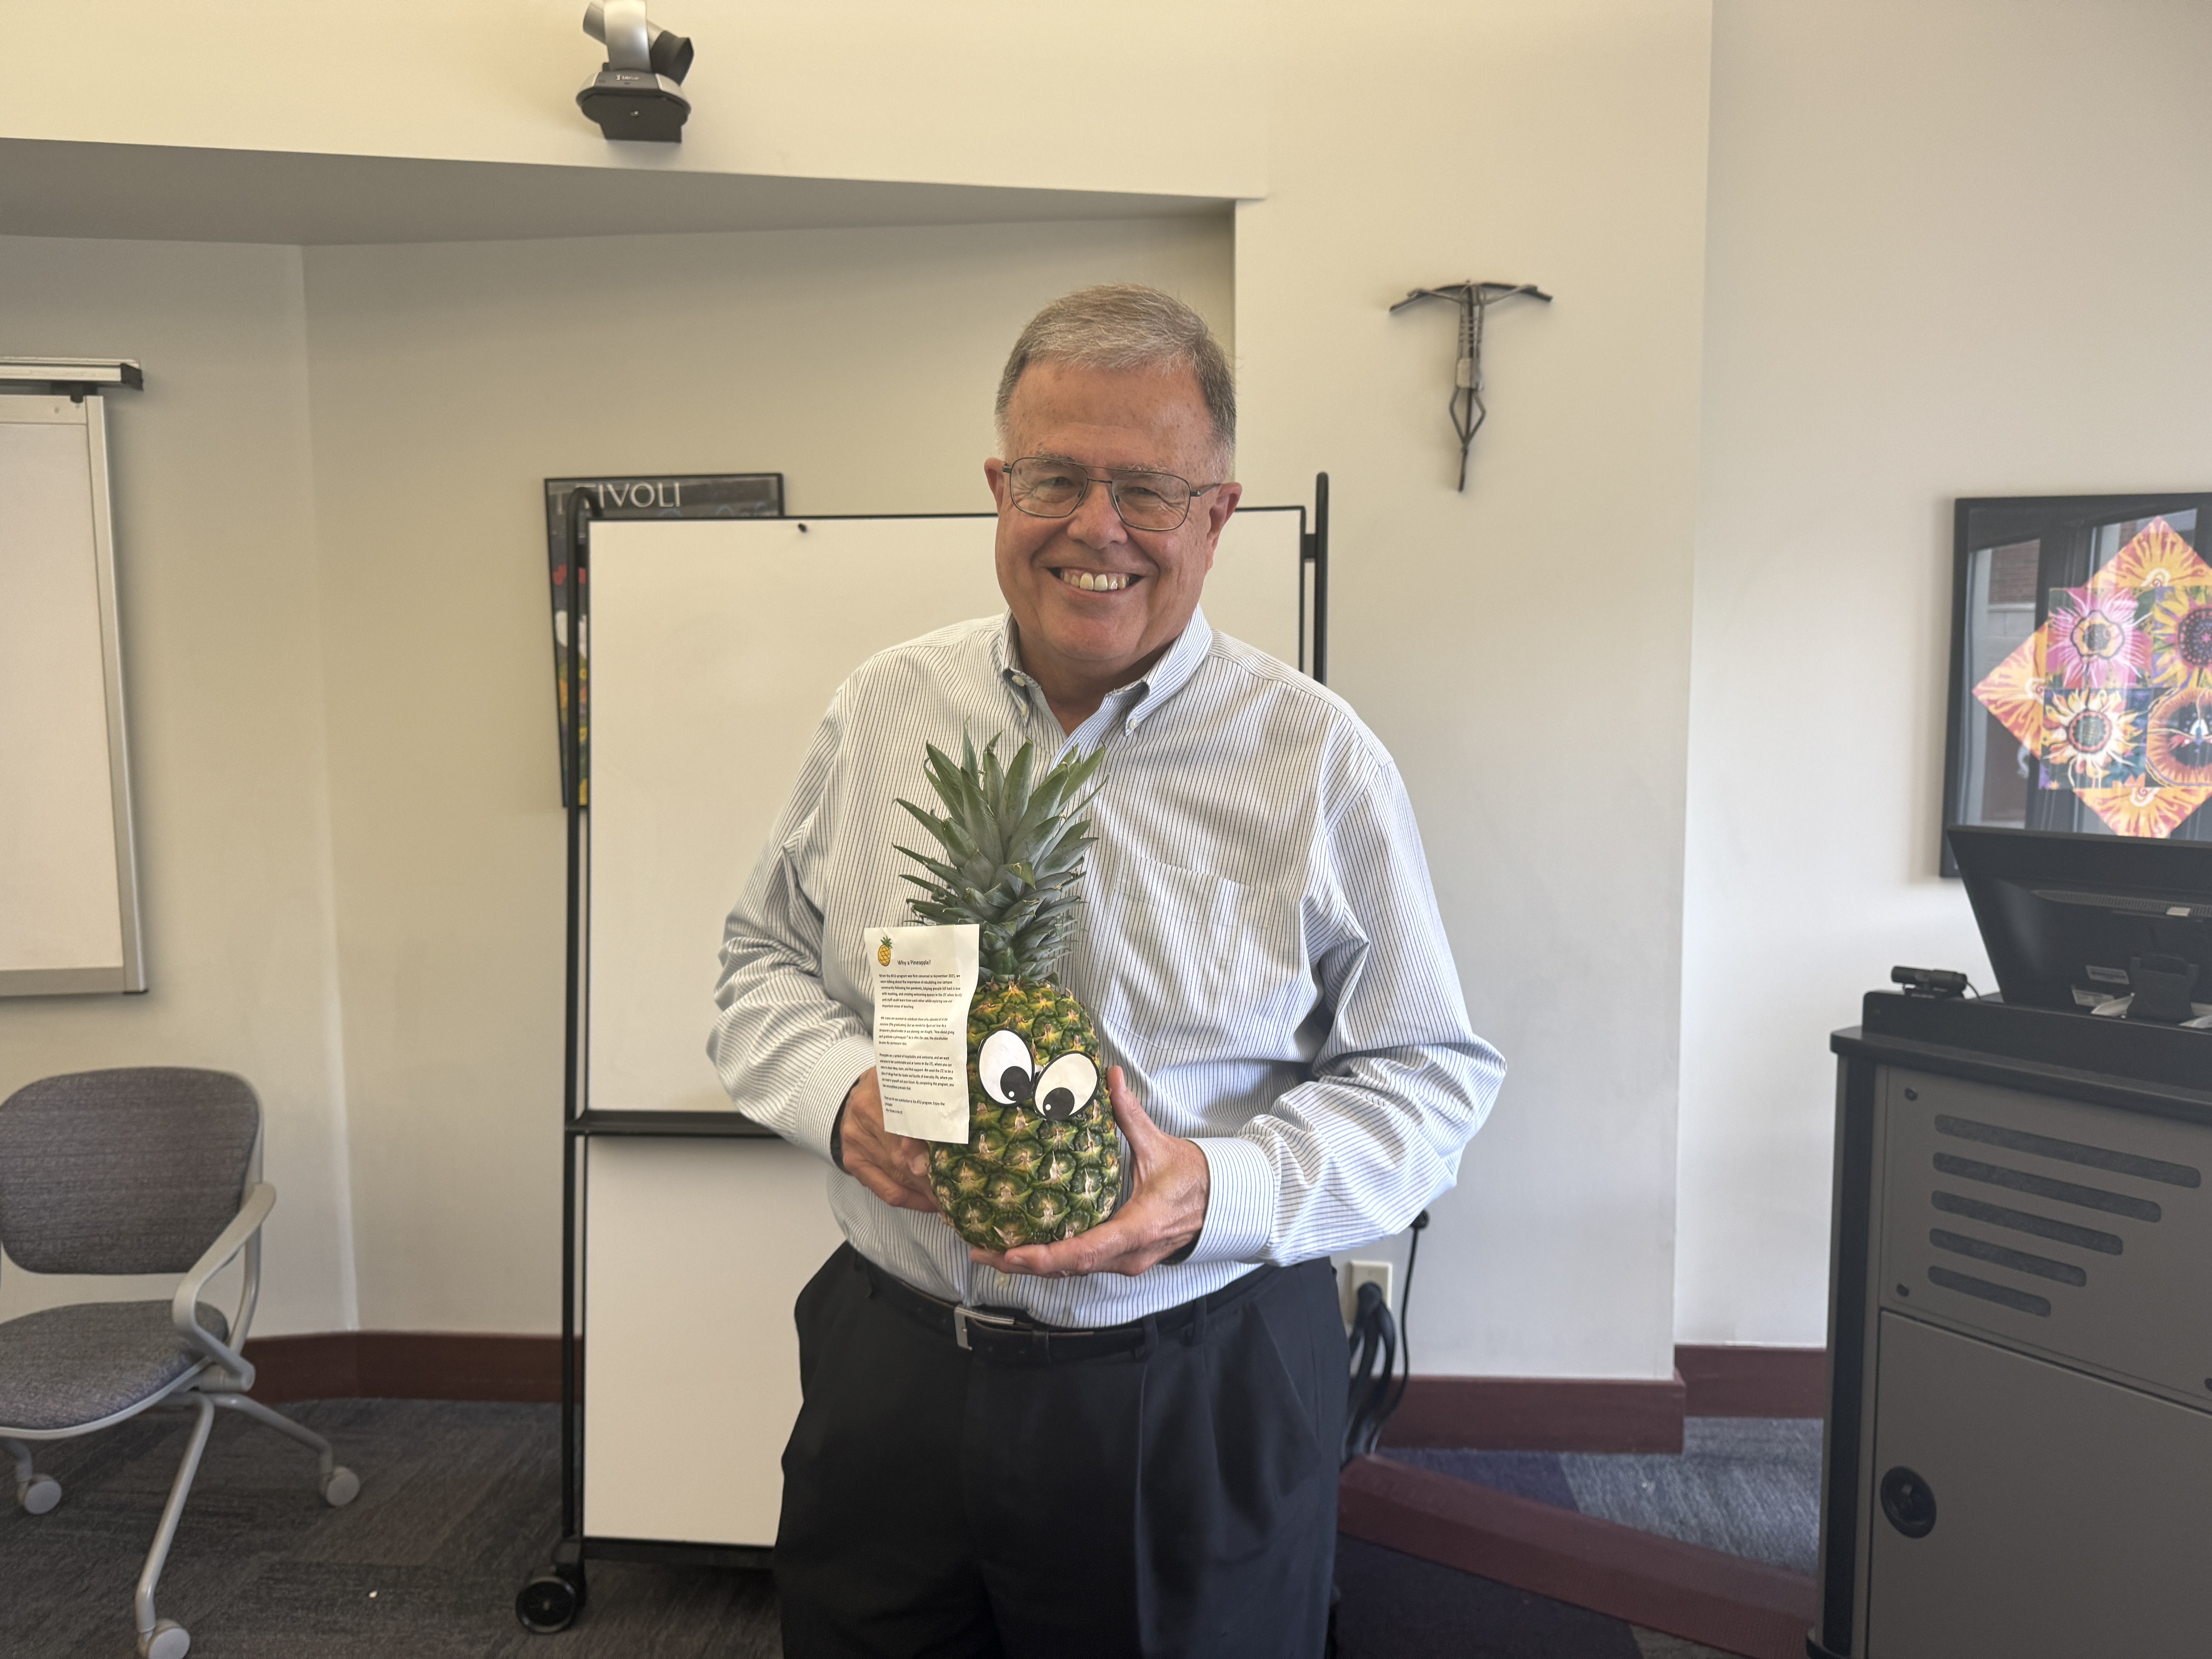 Faculty member Alan Kelley poses with a pineapple to signify his graduation from ATLS.